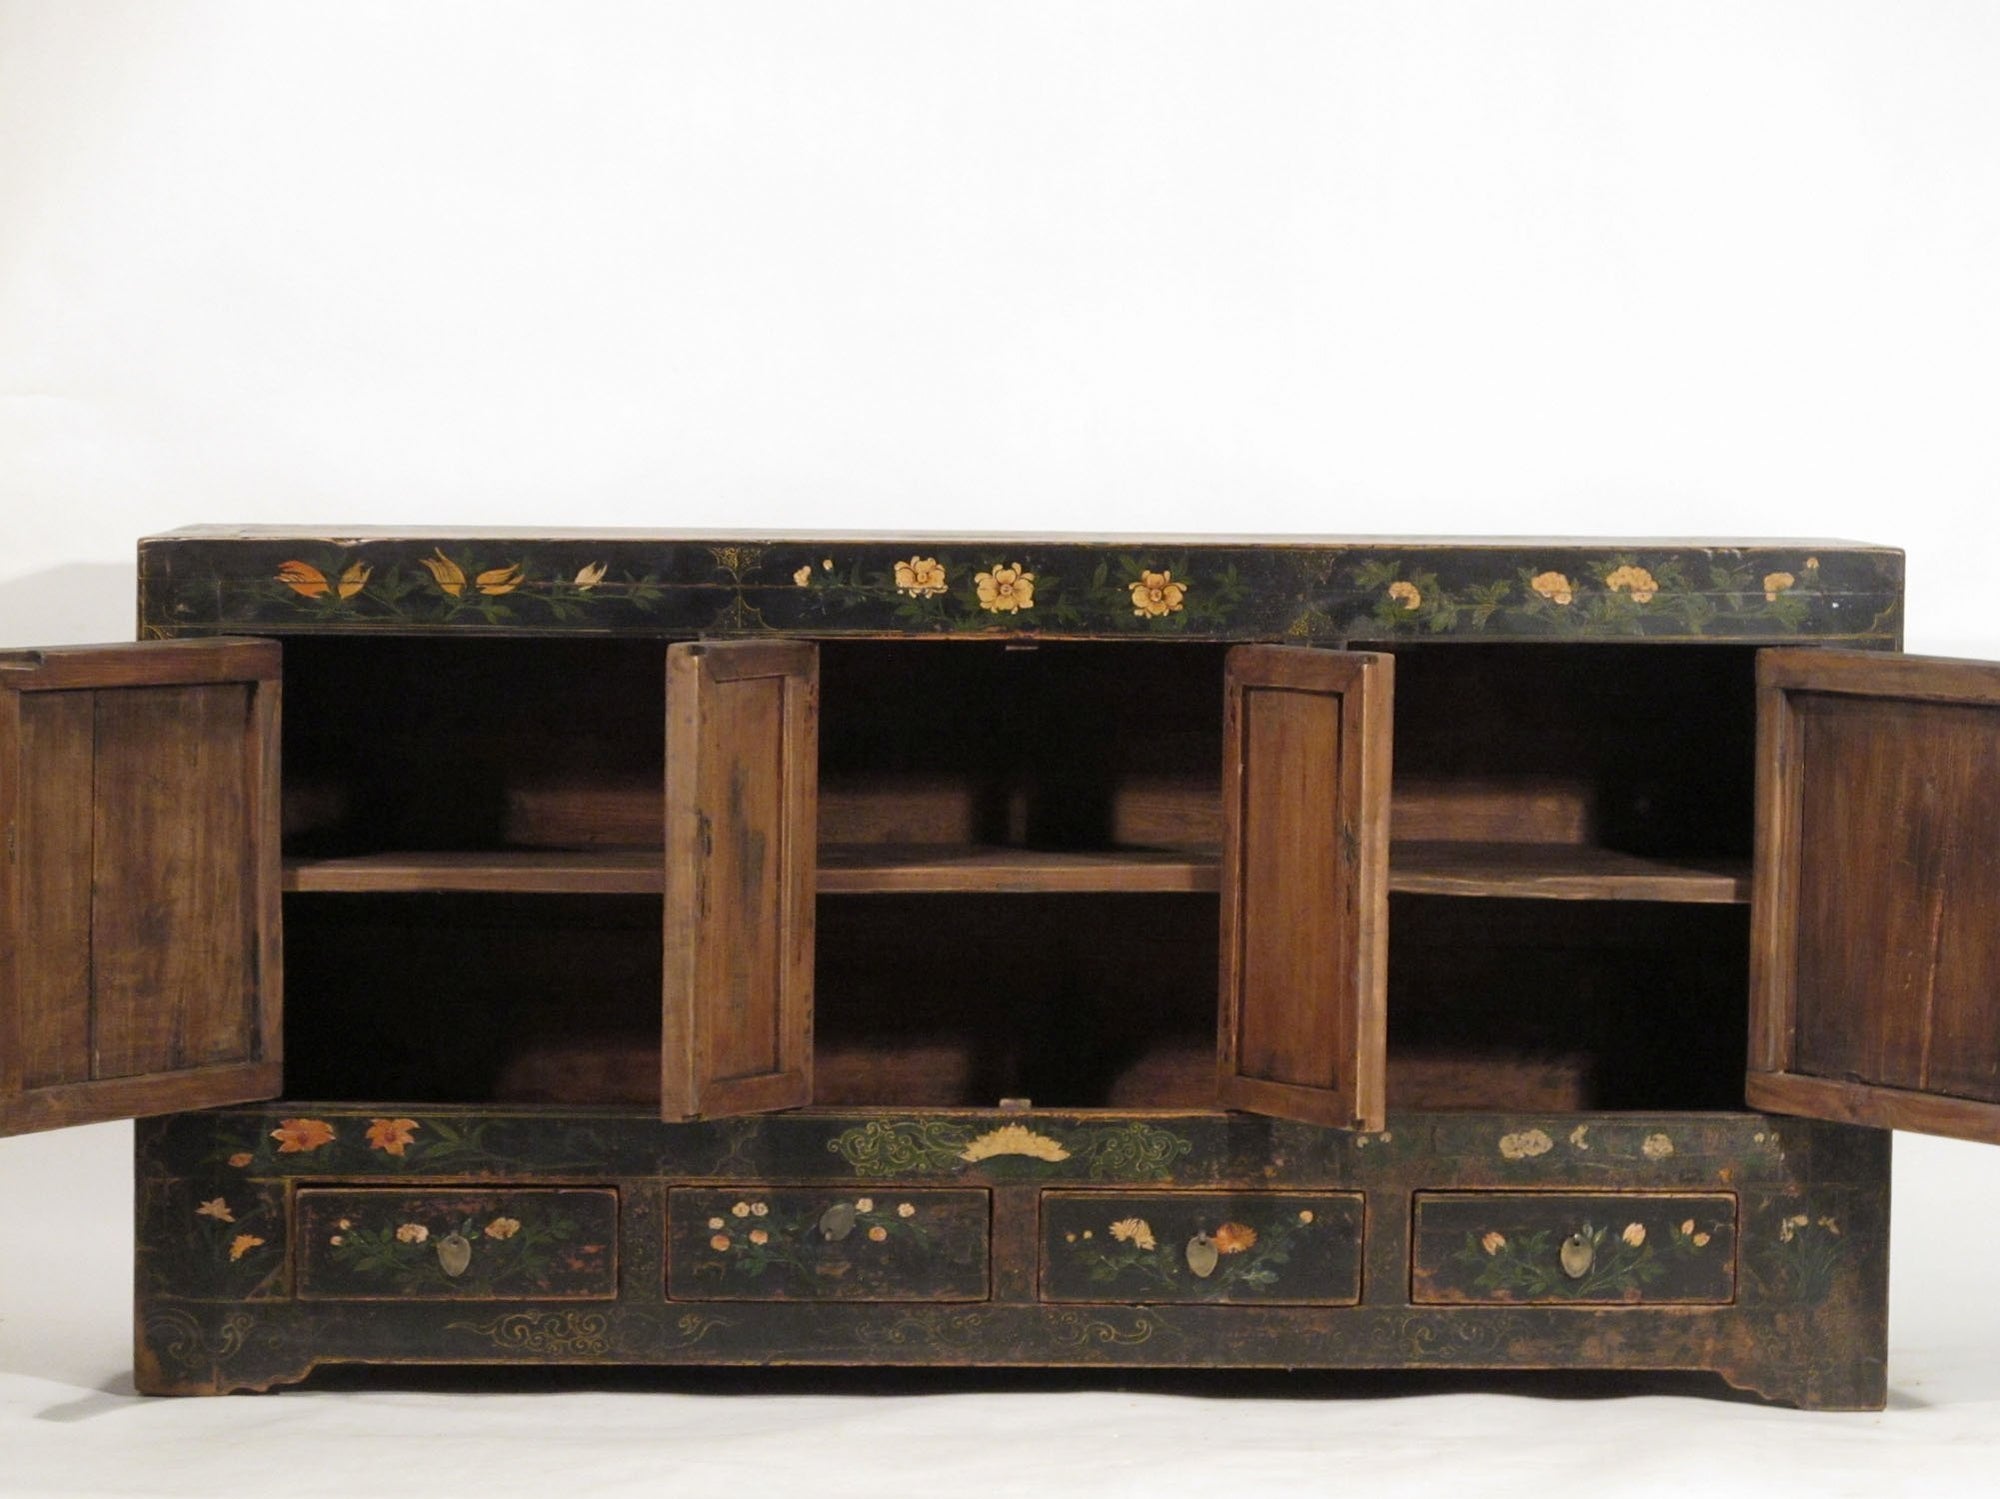 Painted Sideboard From Mongolia - 19thC | Indigo Oriental Antiques